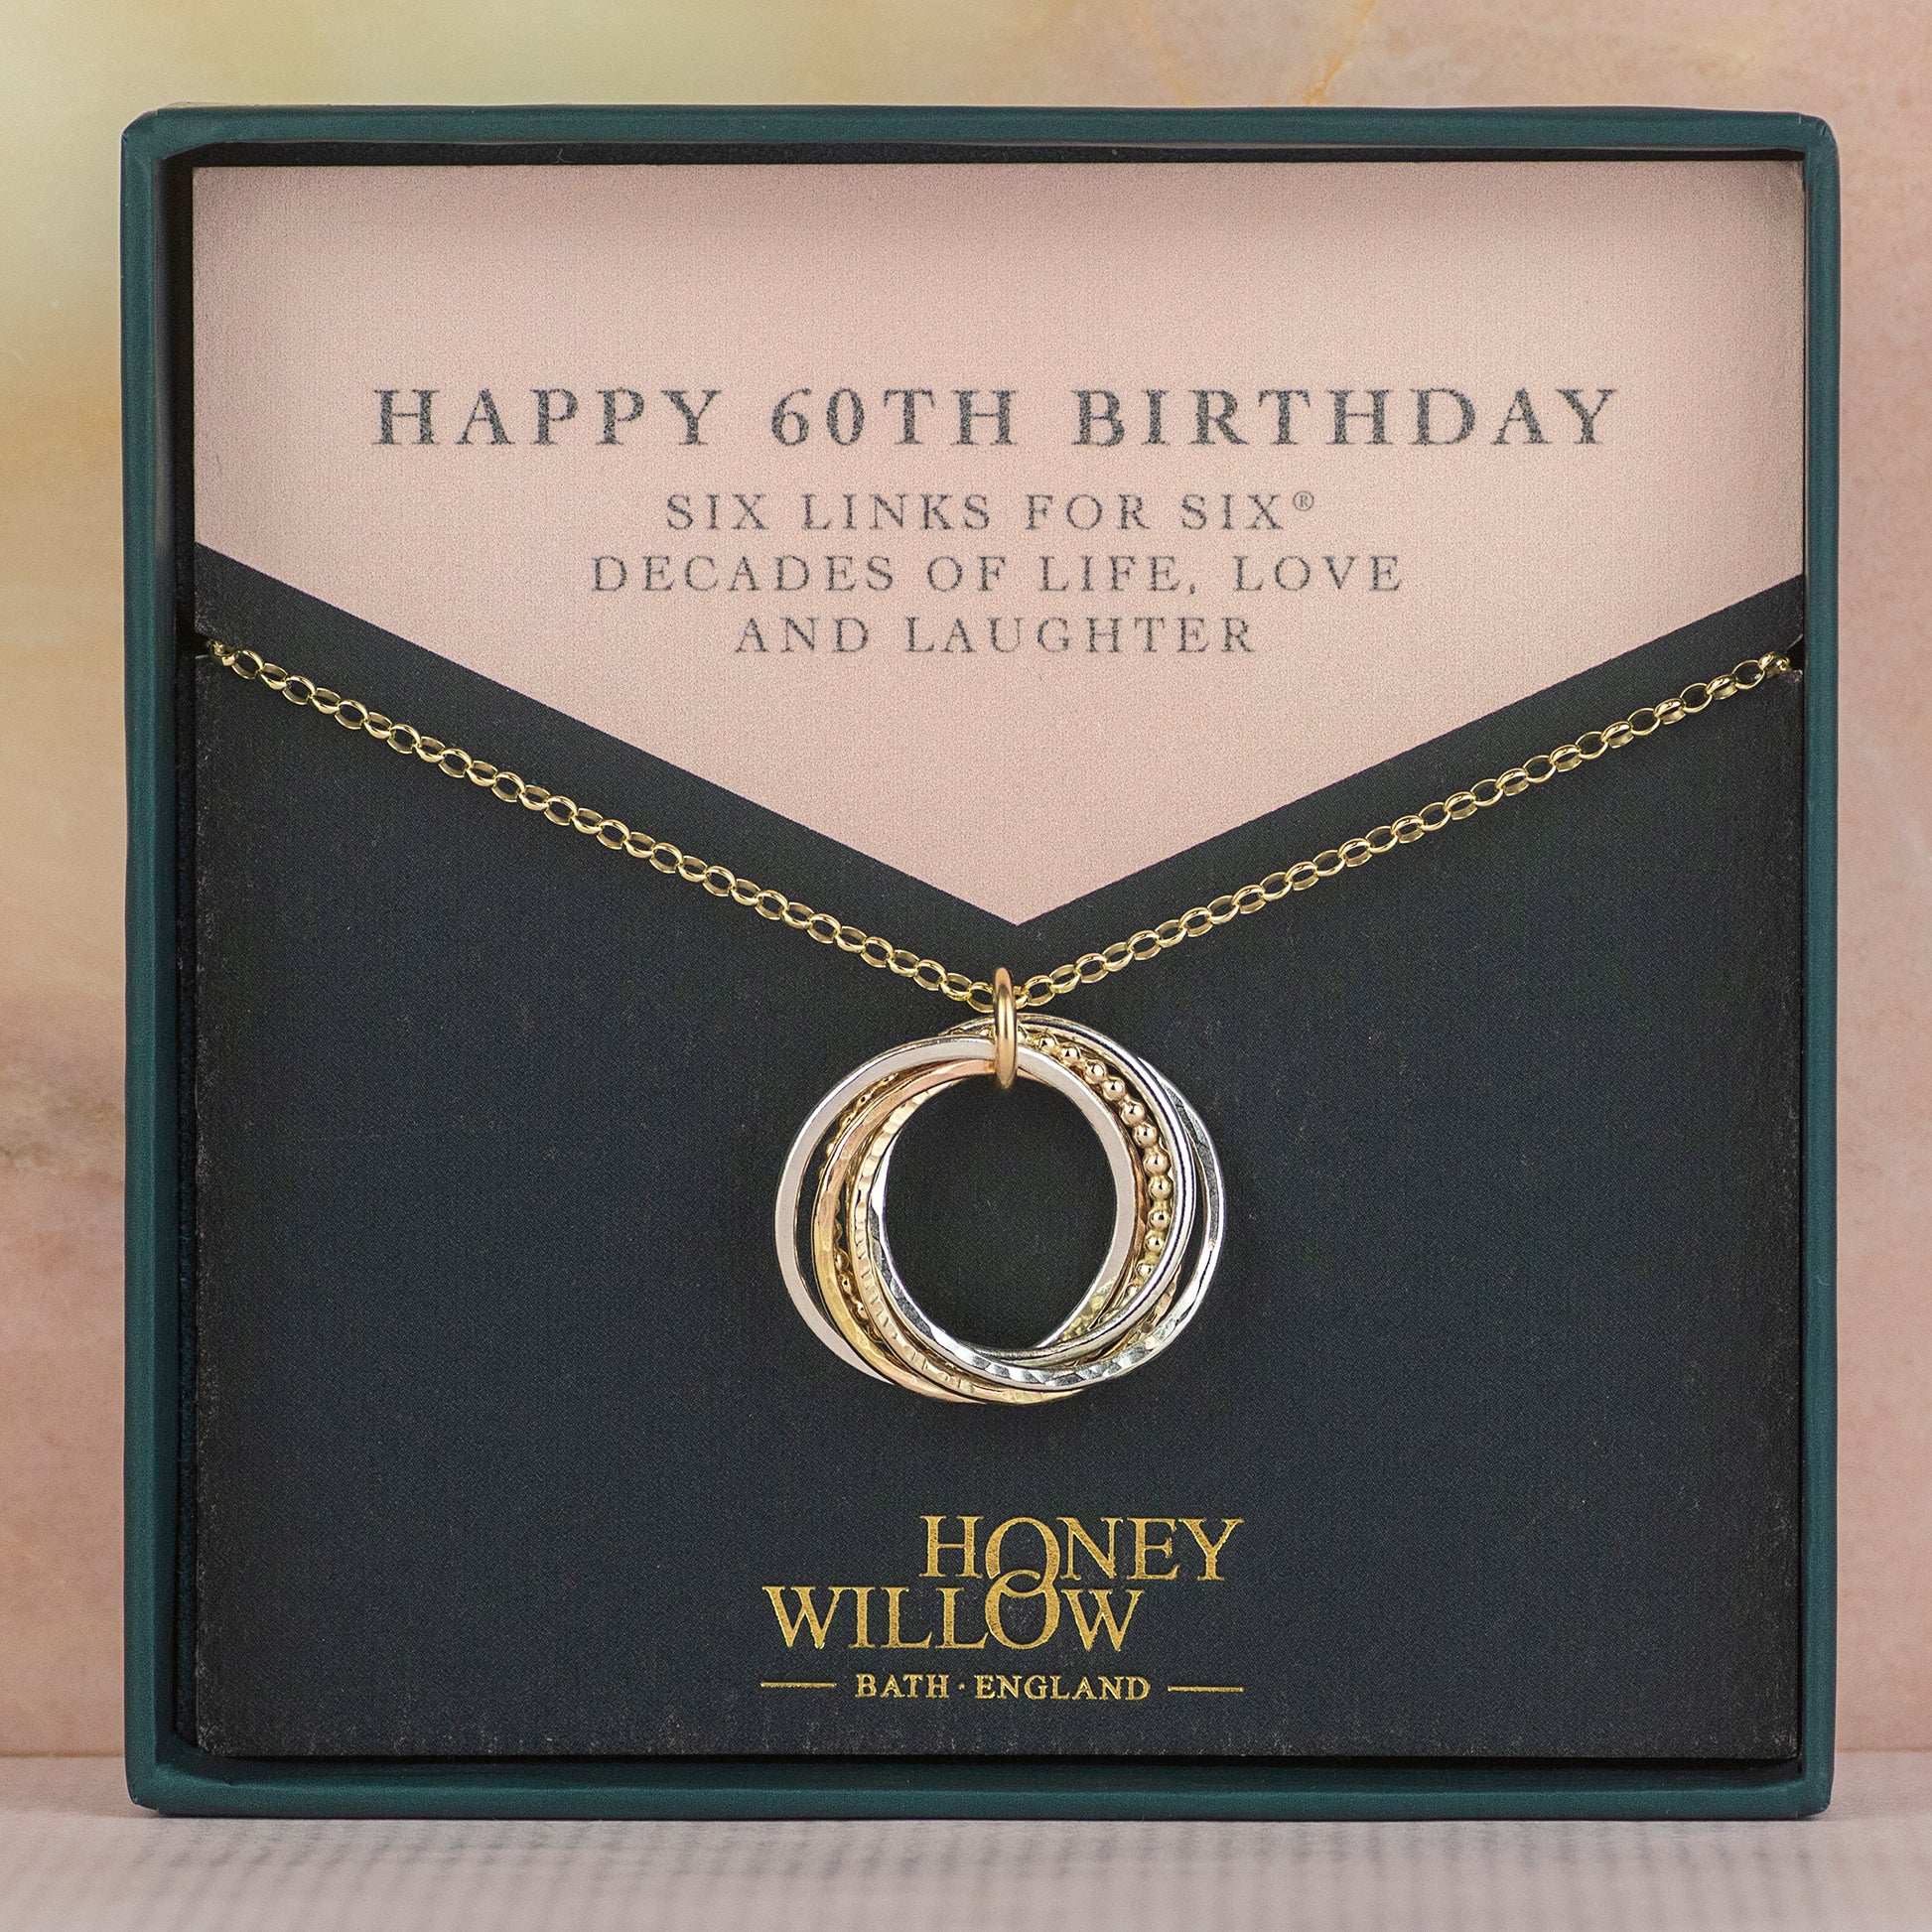 9kt Gold 60th Birthday Necklace - The Original 6 Links for 6 Decades Necklace - Recycled Gold, Rose Gold & Silver